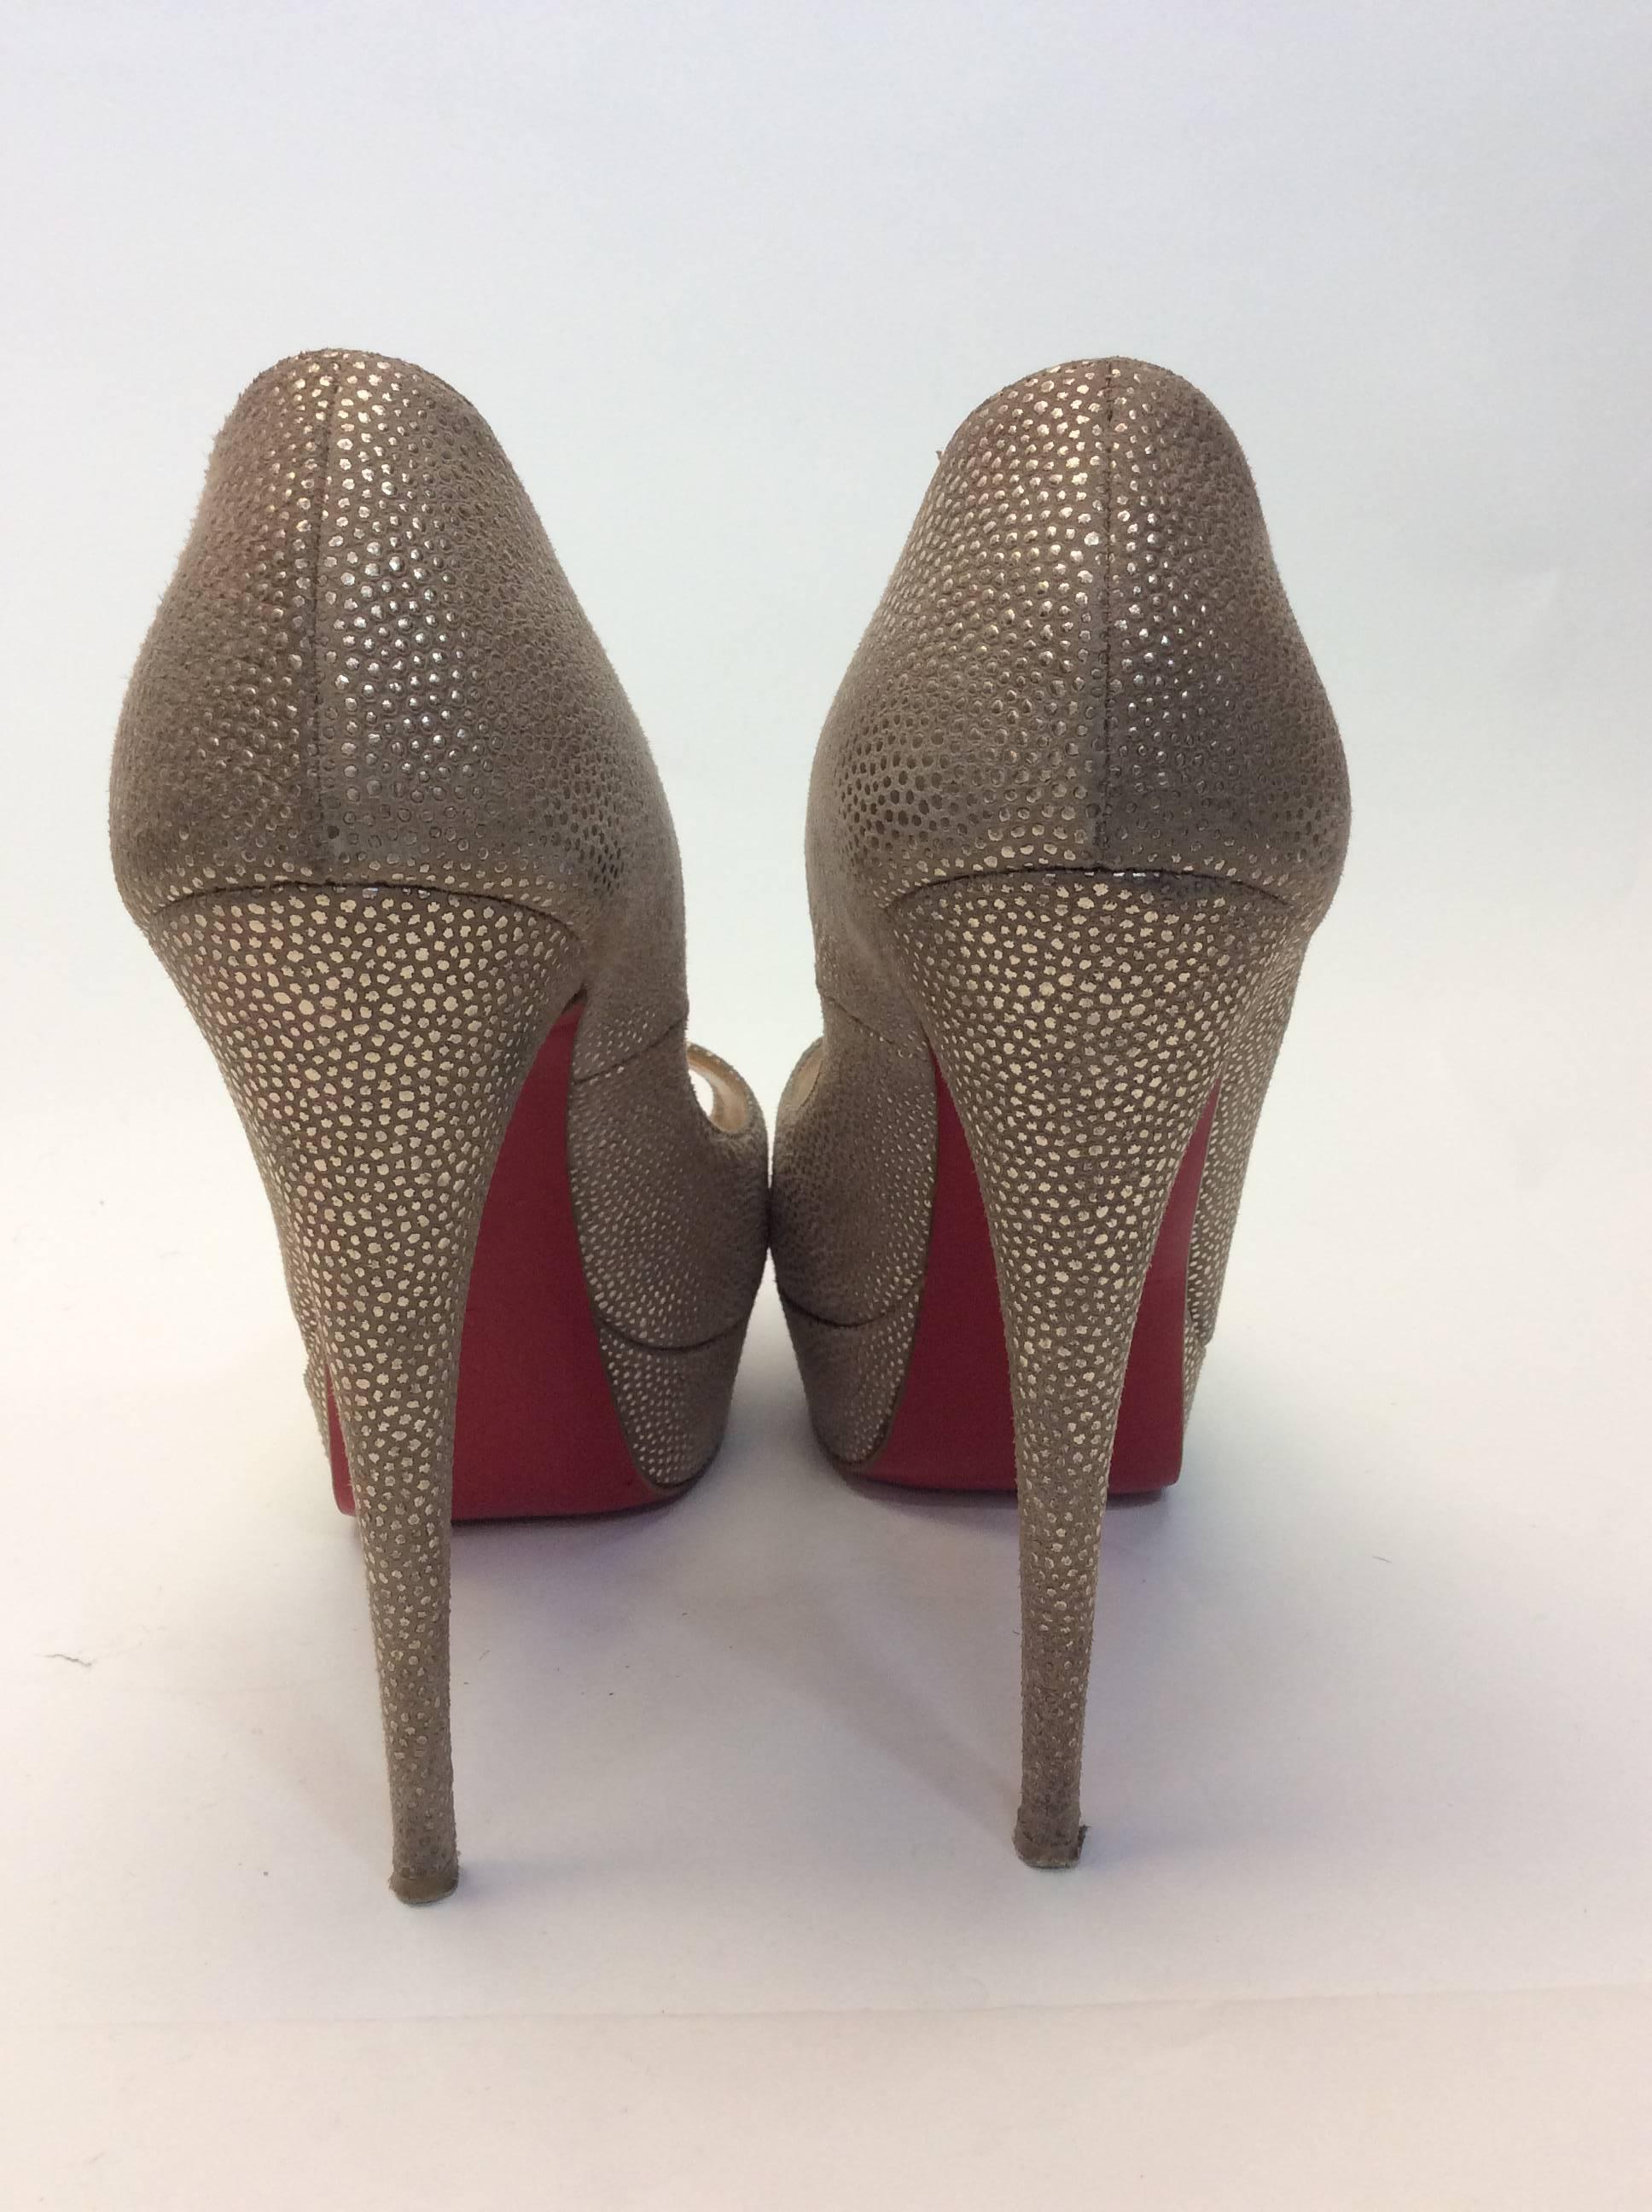 Christian Louboutin Textured Peep Tpe Platform Heels In Excellent Condition For Sale In Narberth, PA